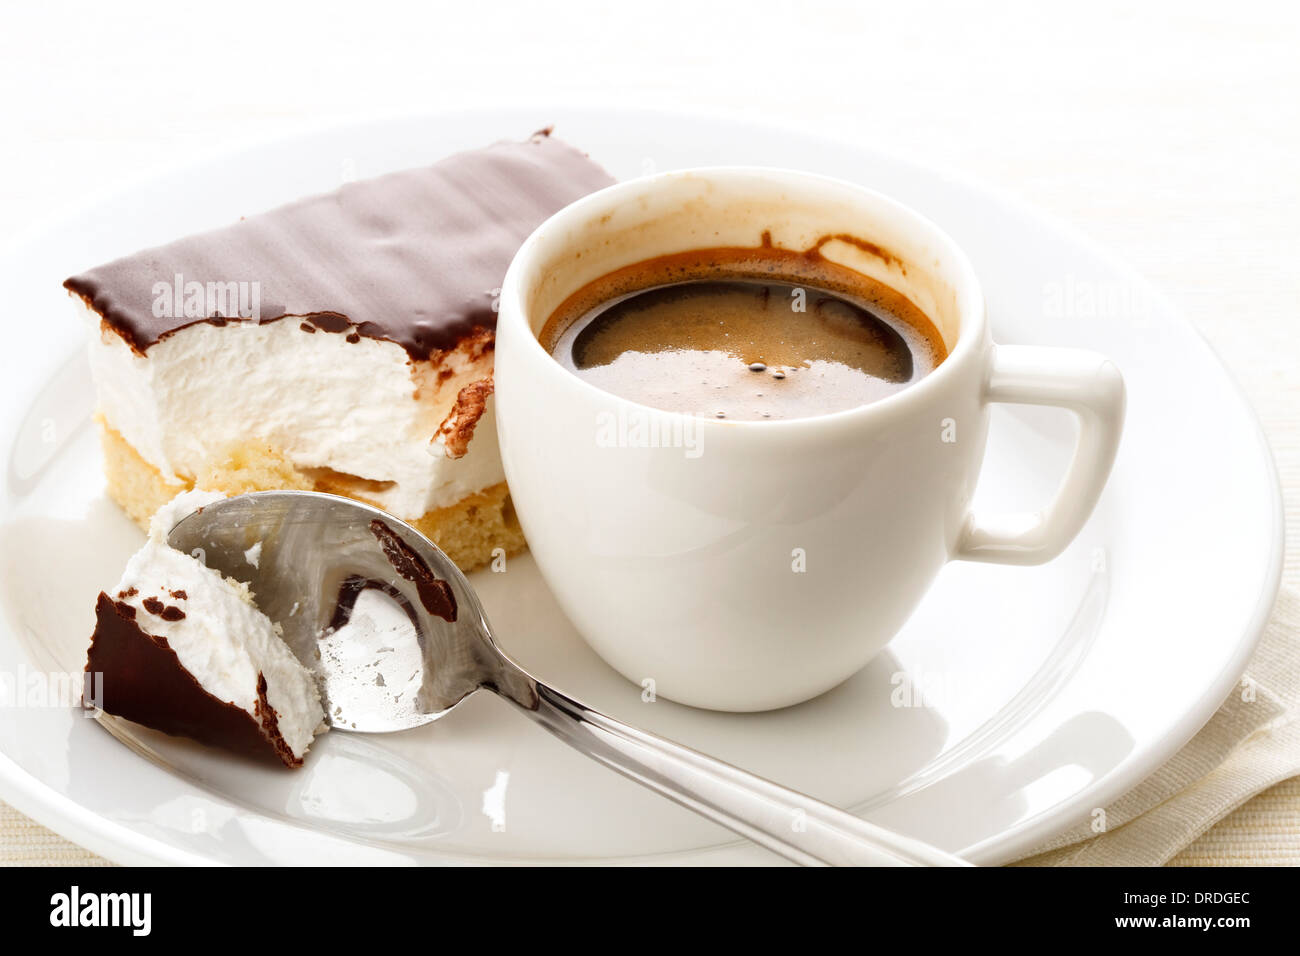 Espresso cup with chocolate covered Marshmallow on white plate Stock Photo